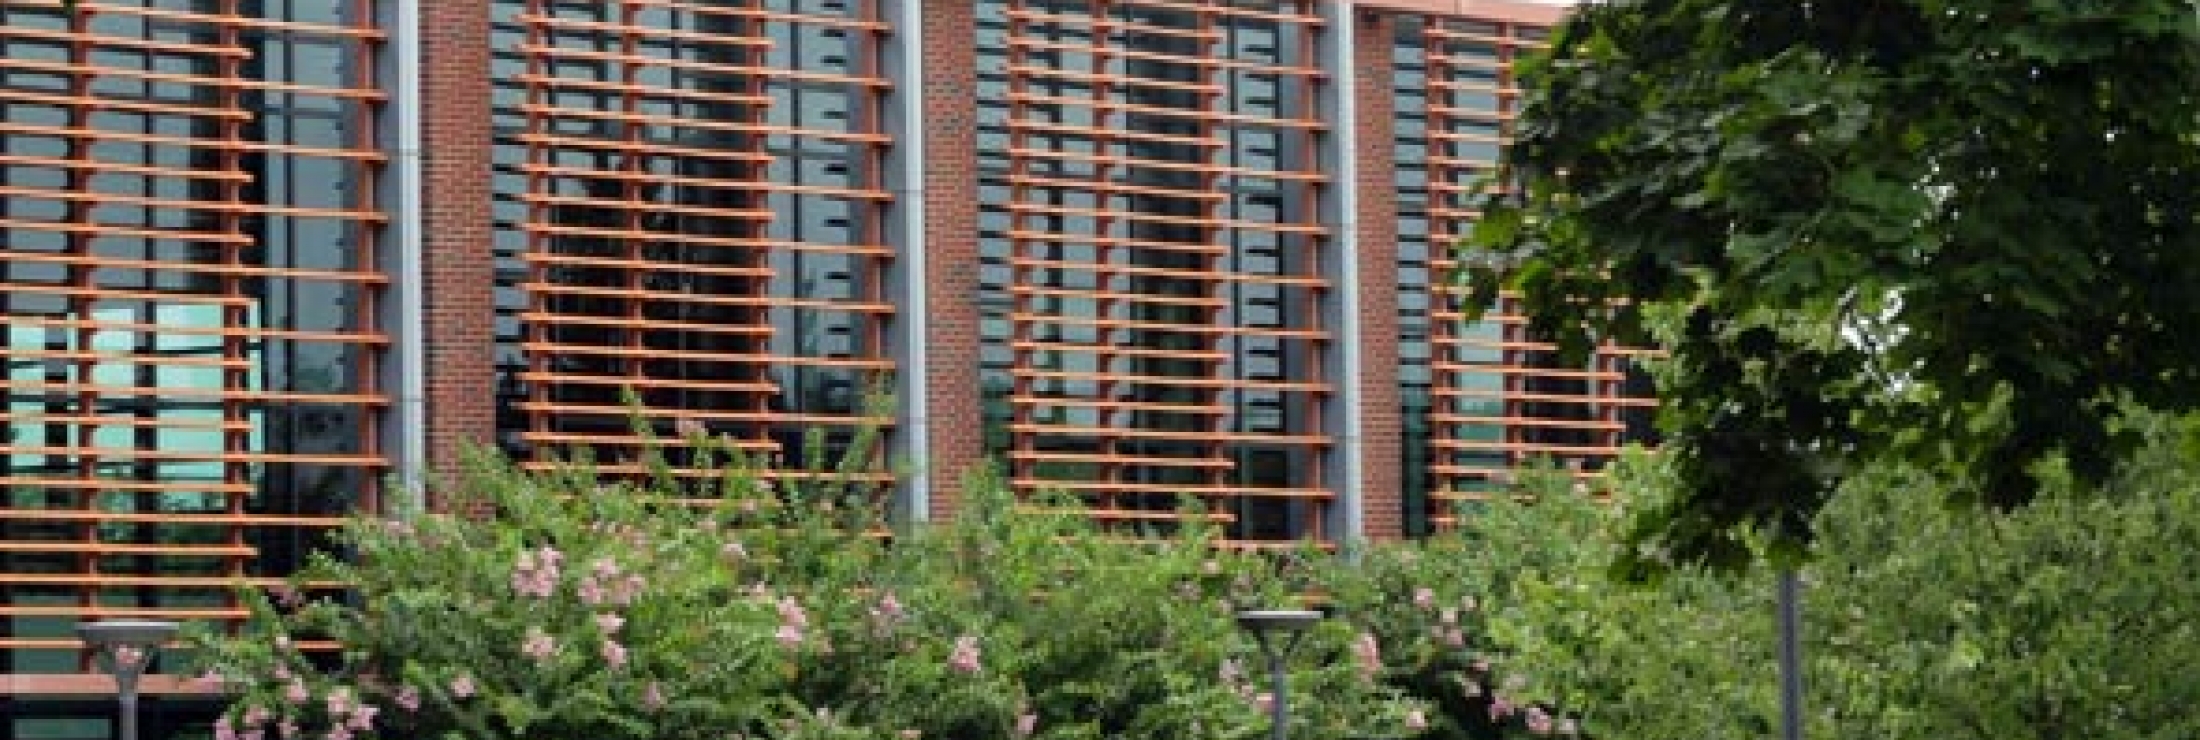 Cladding Corp Terra5 Terracotta Sunscreen Louver System Elevation